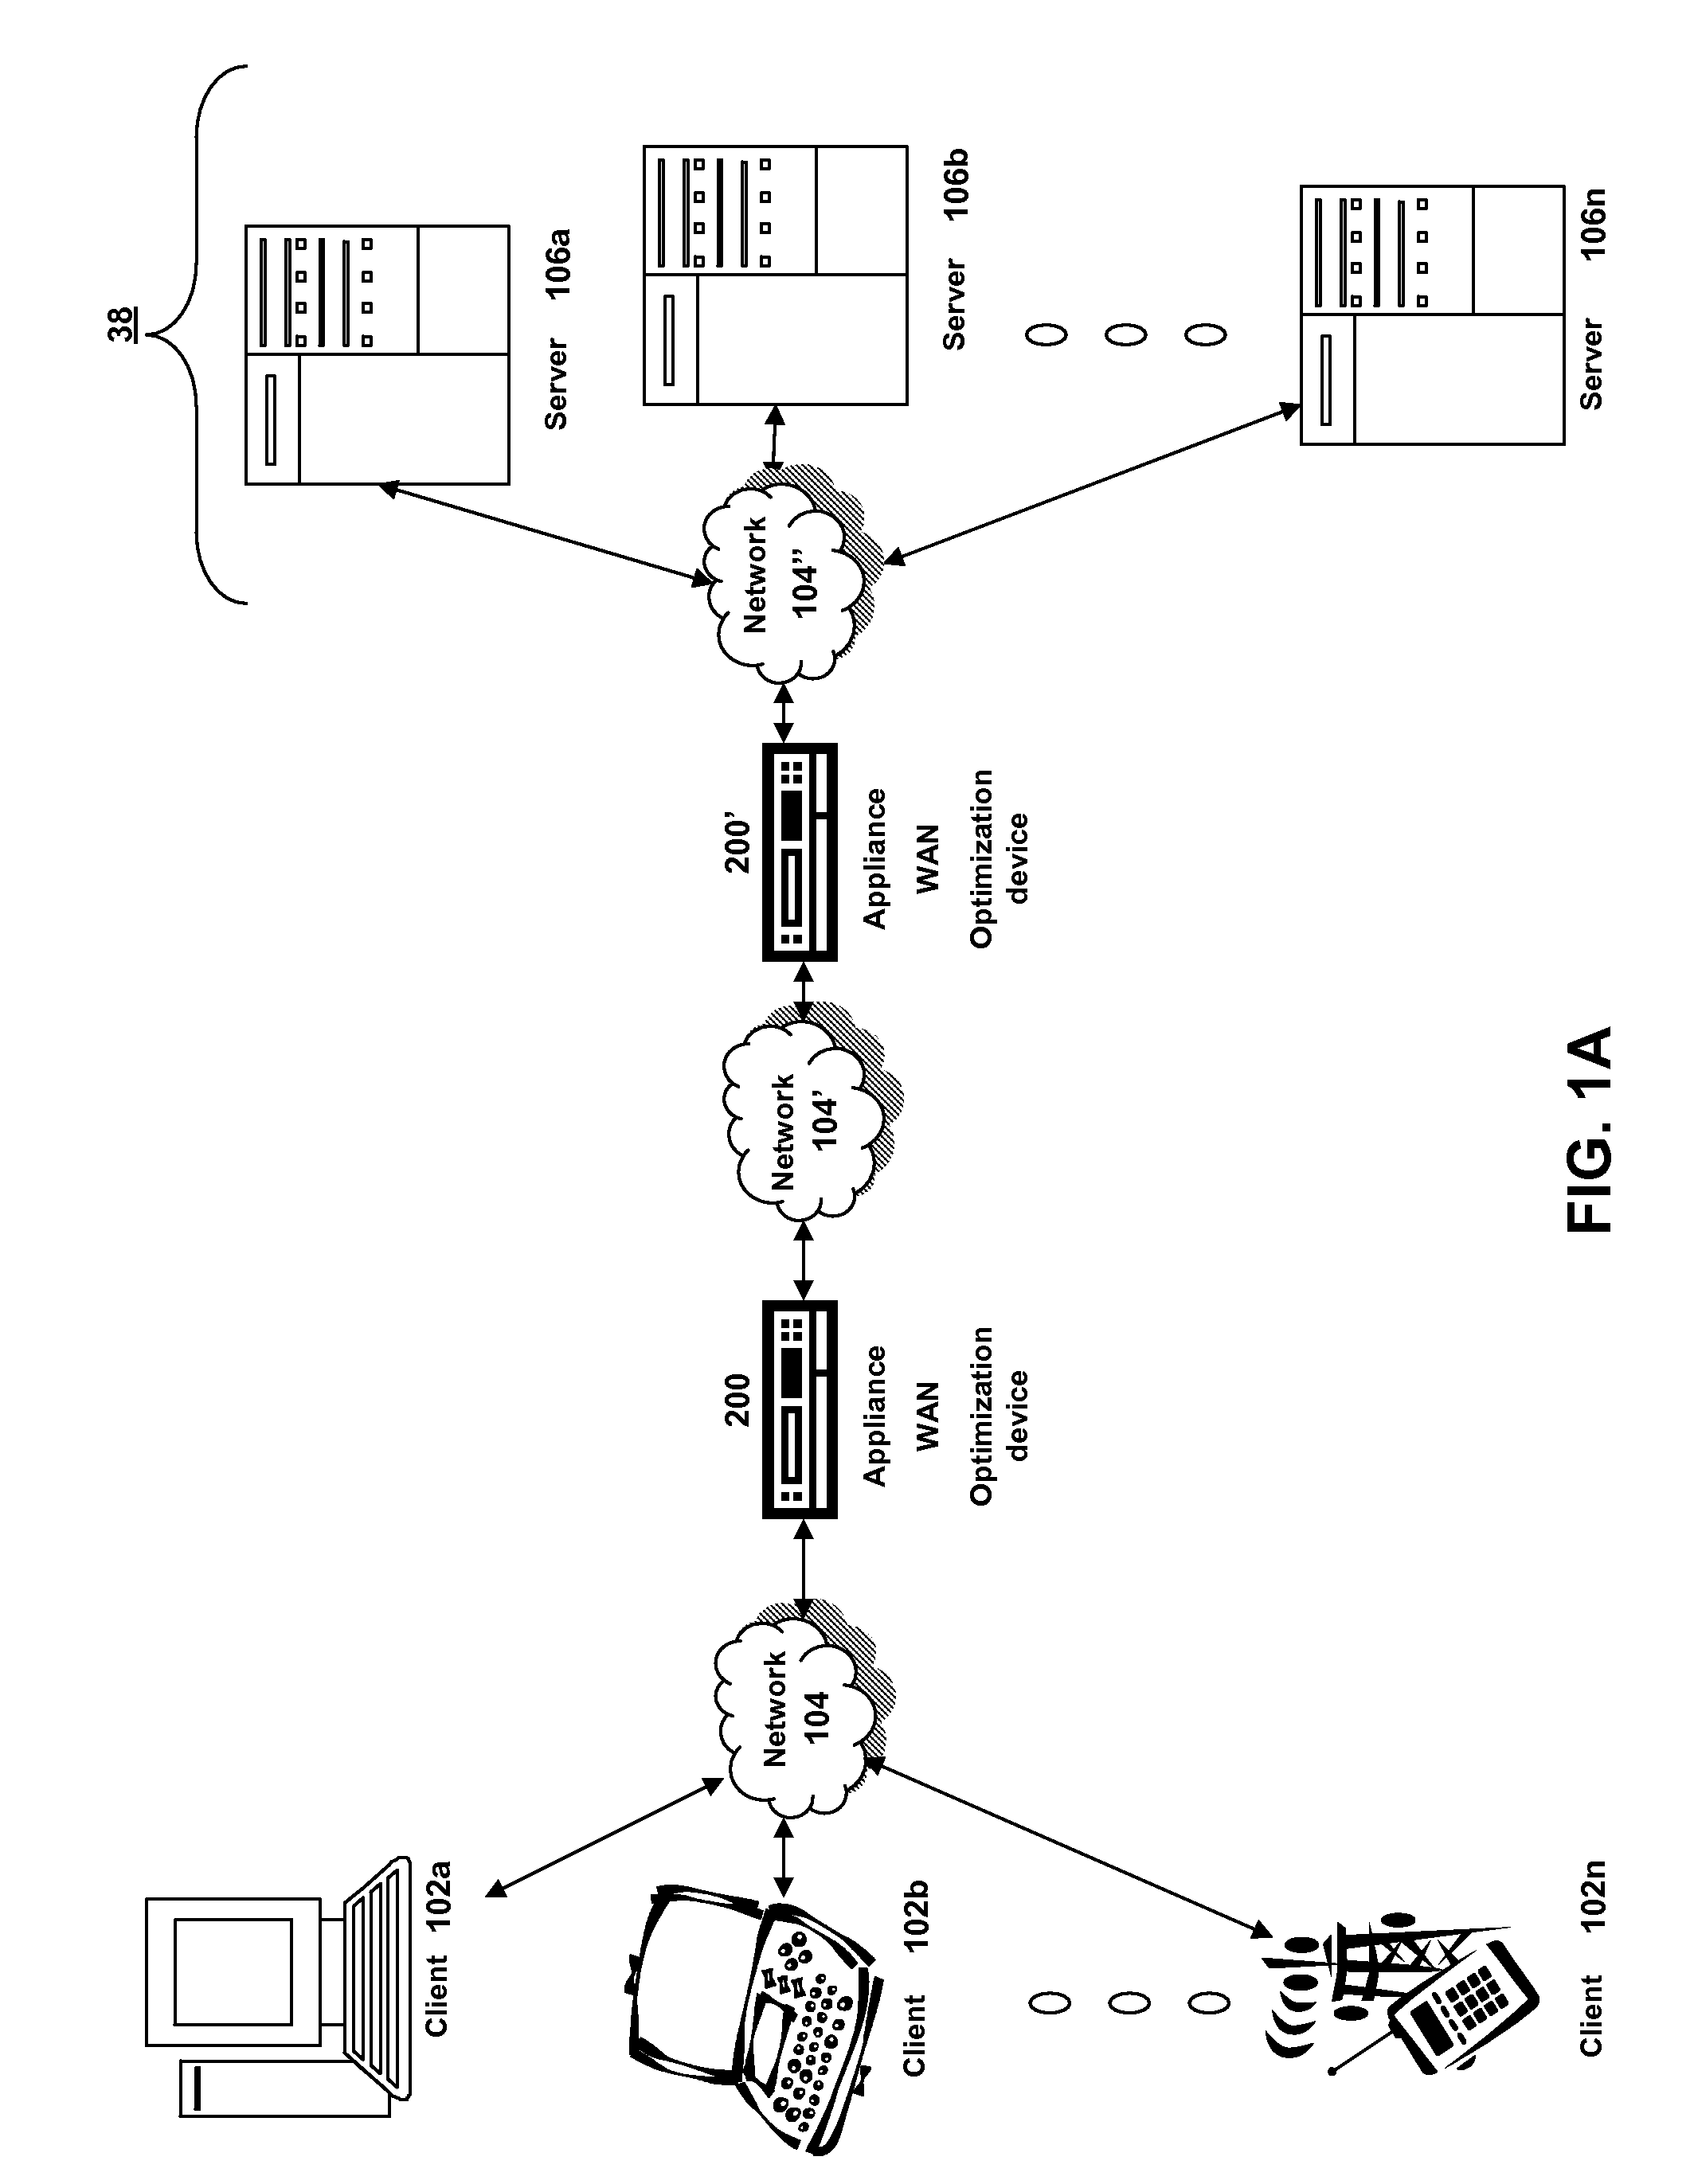 Systems and methods of clustered sharing of compression histories